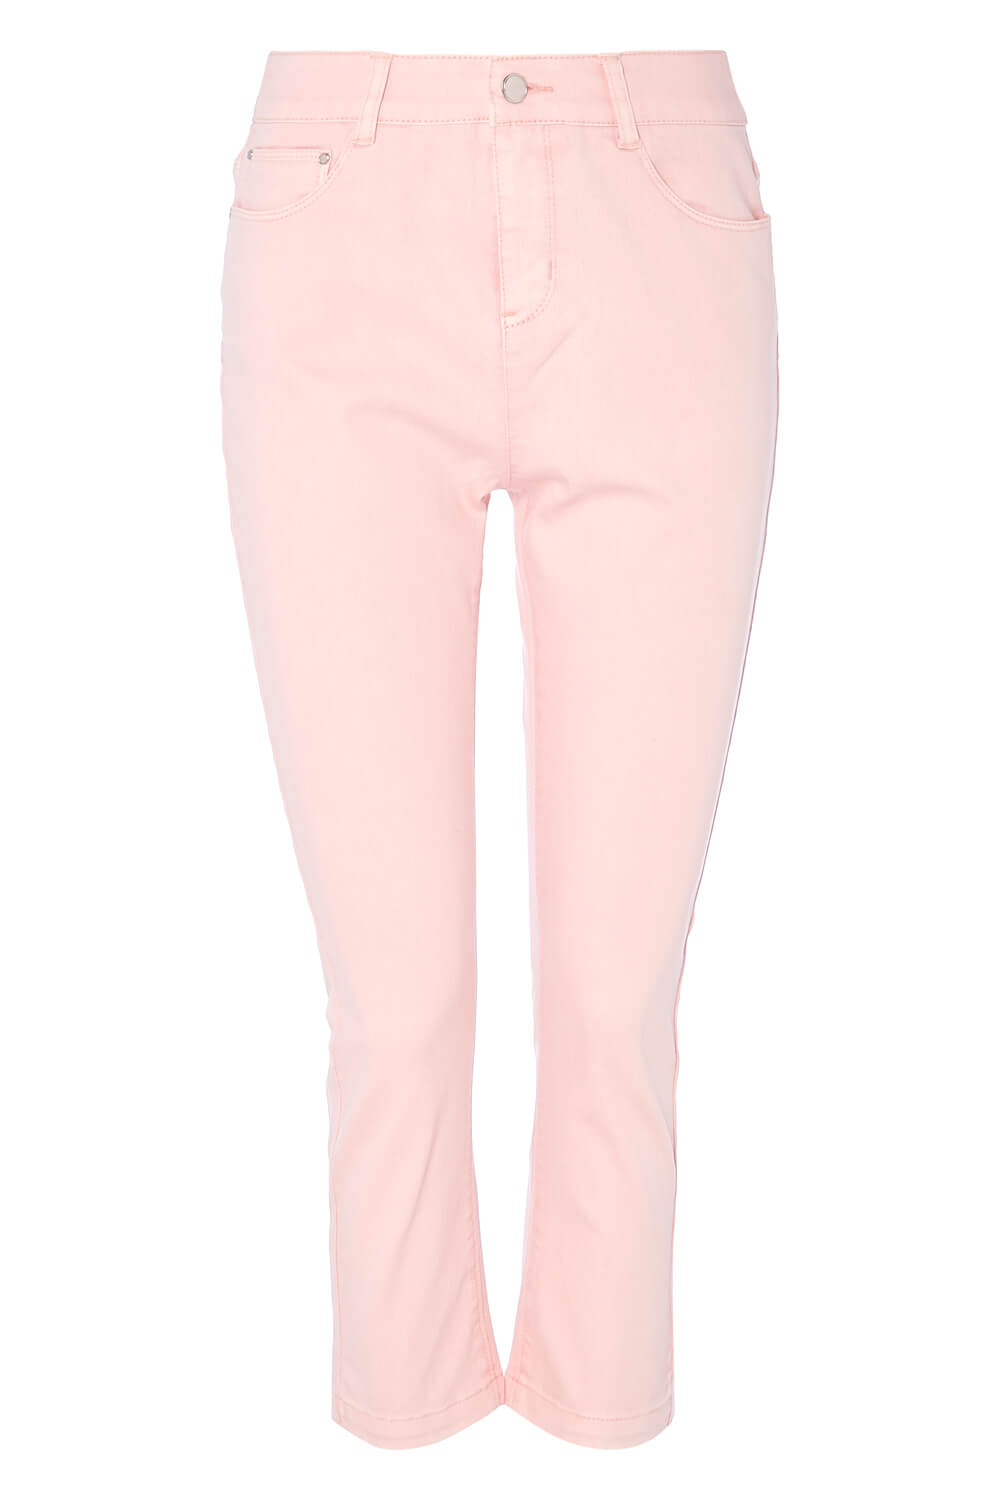 Light-Pink Cropped Jean, Image 5 of 5